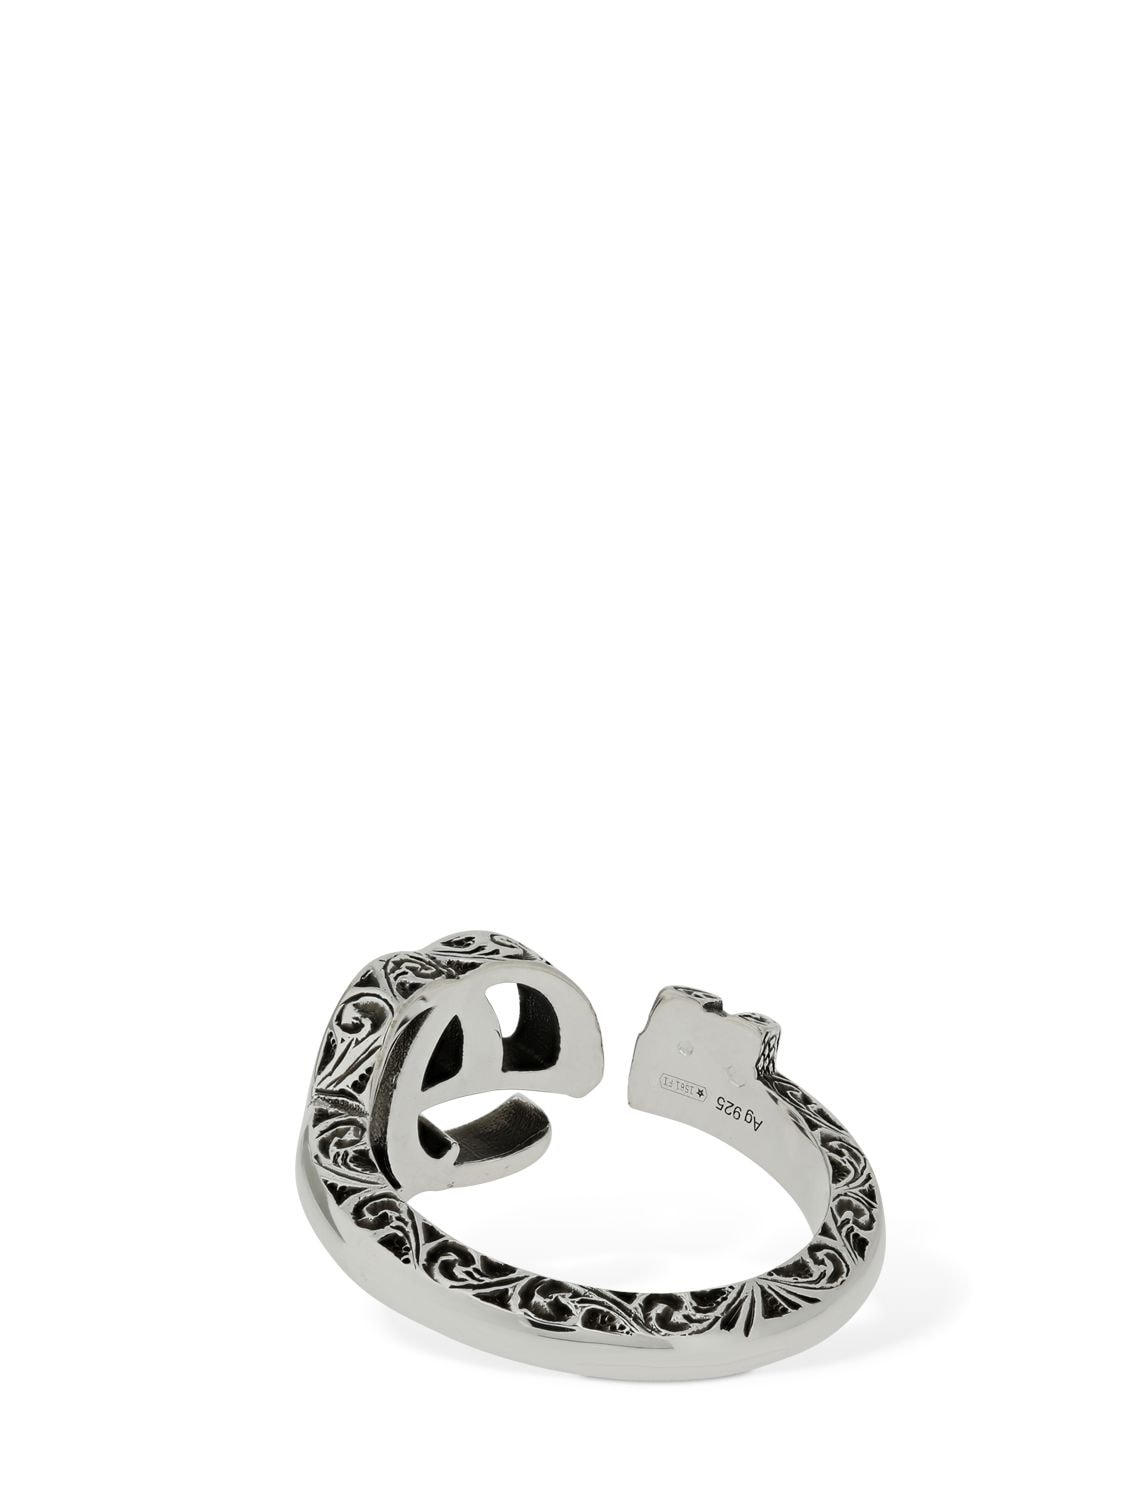 Gucci Gg Marmont Key Sterling Silver Ring | ModeSens